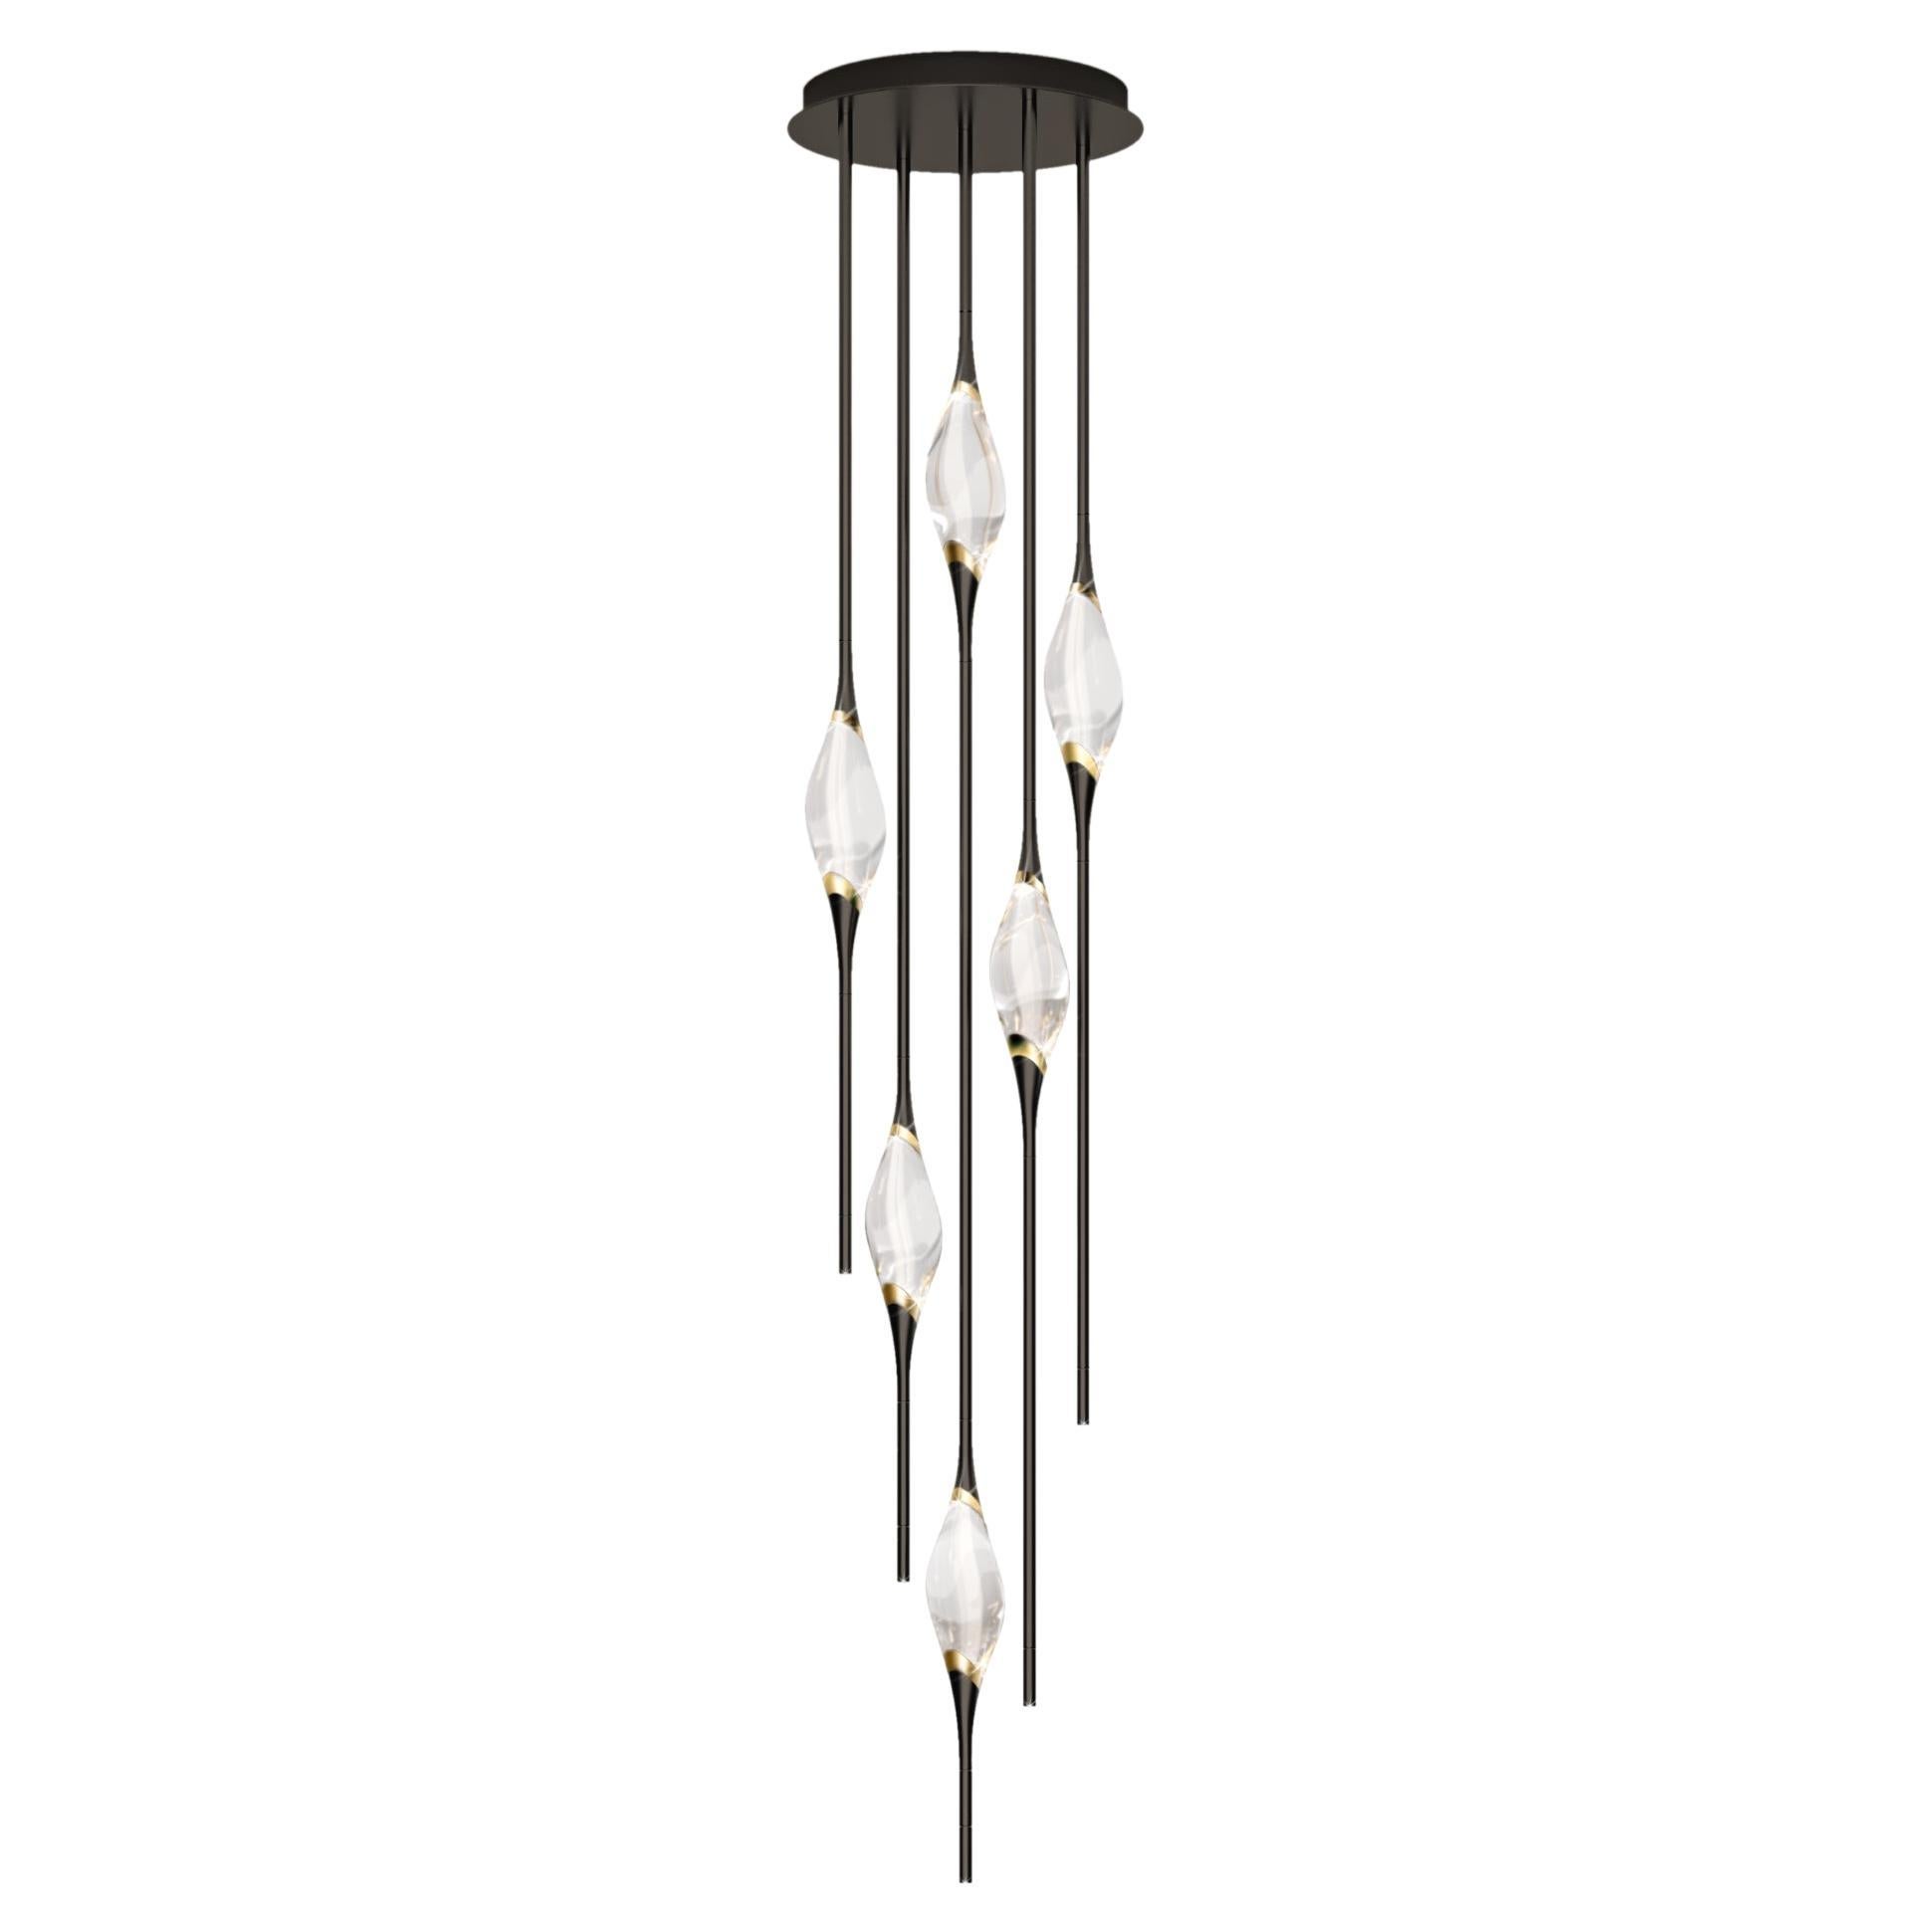 "Il Pezzo 12 Cluster Chandelier" - height 200cm/78.7" - black and polished brass